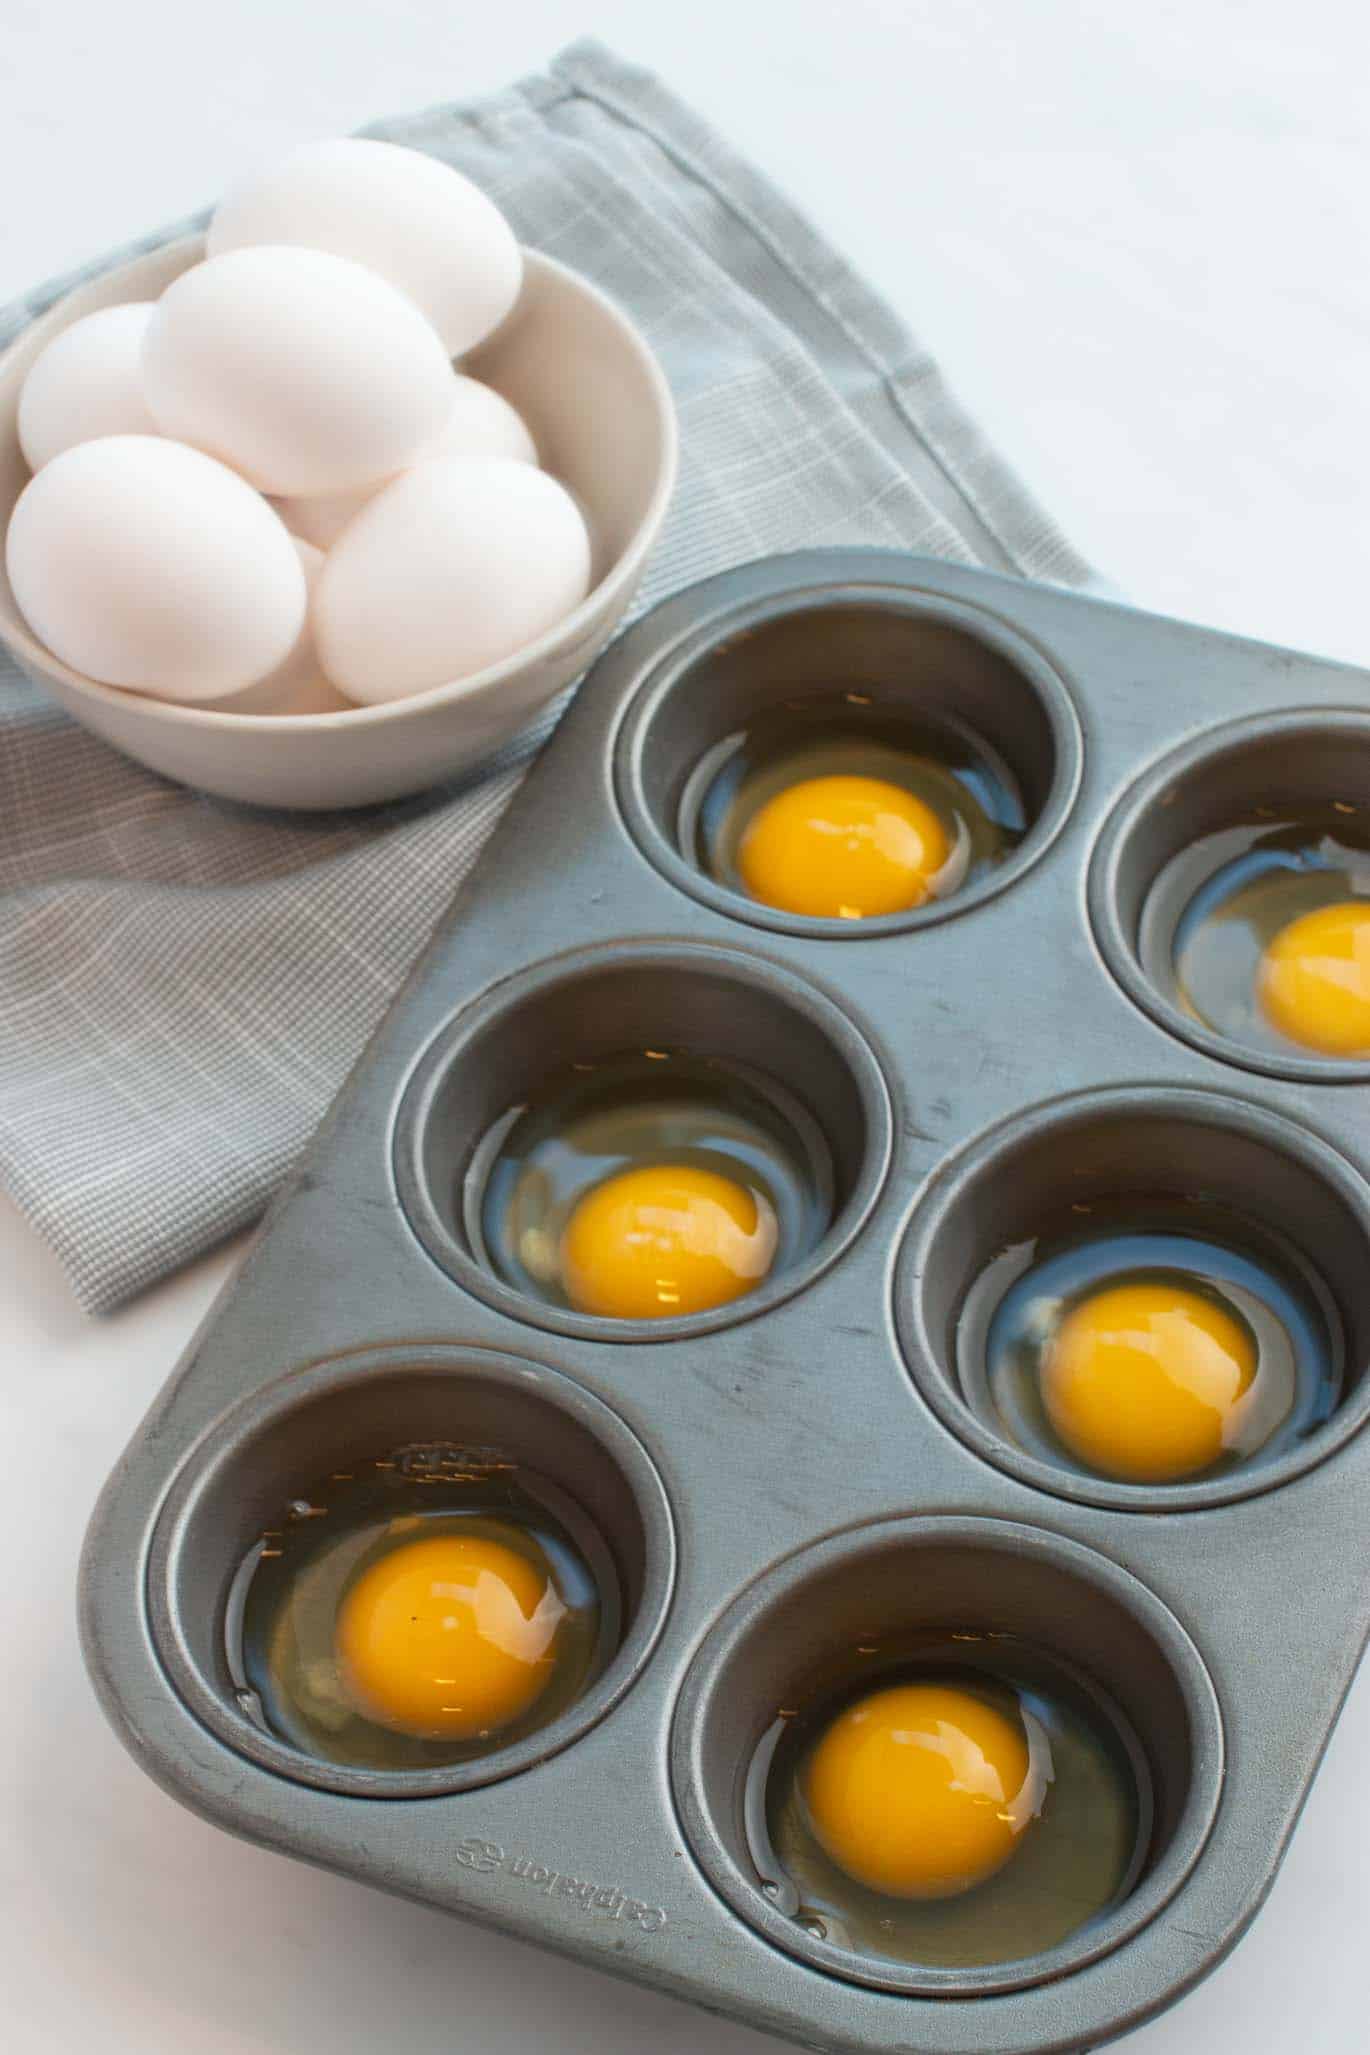 Can you freeze eggs? YES you can! Here is a post on how to properly freeze eggs to use later. 